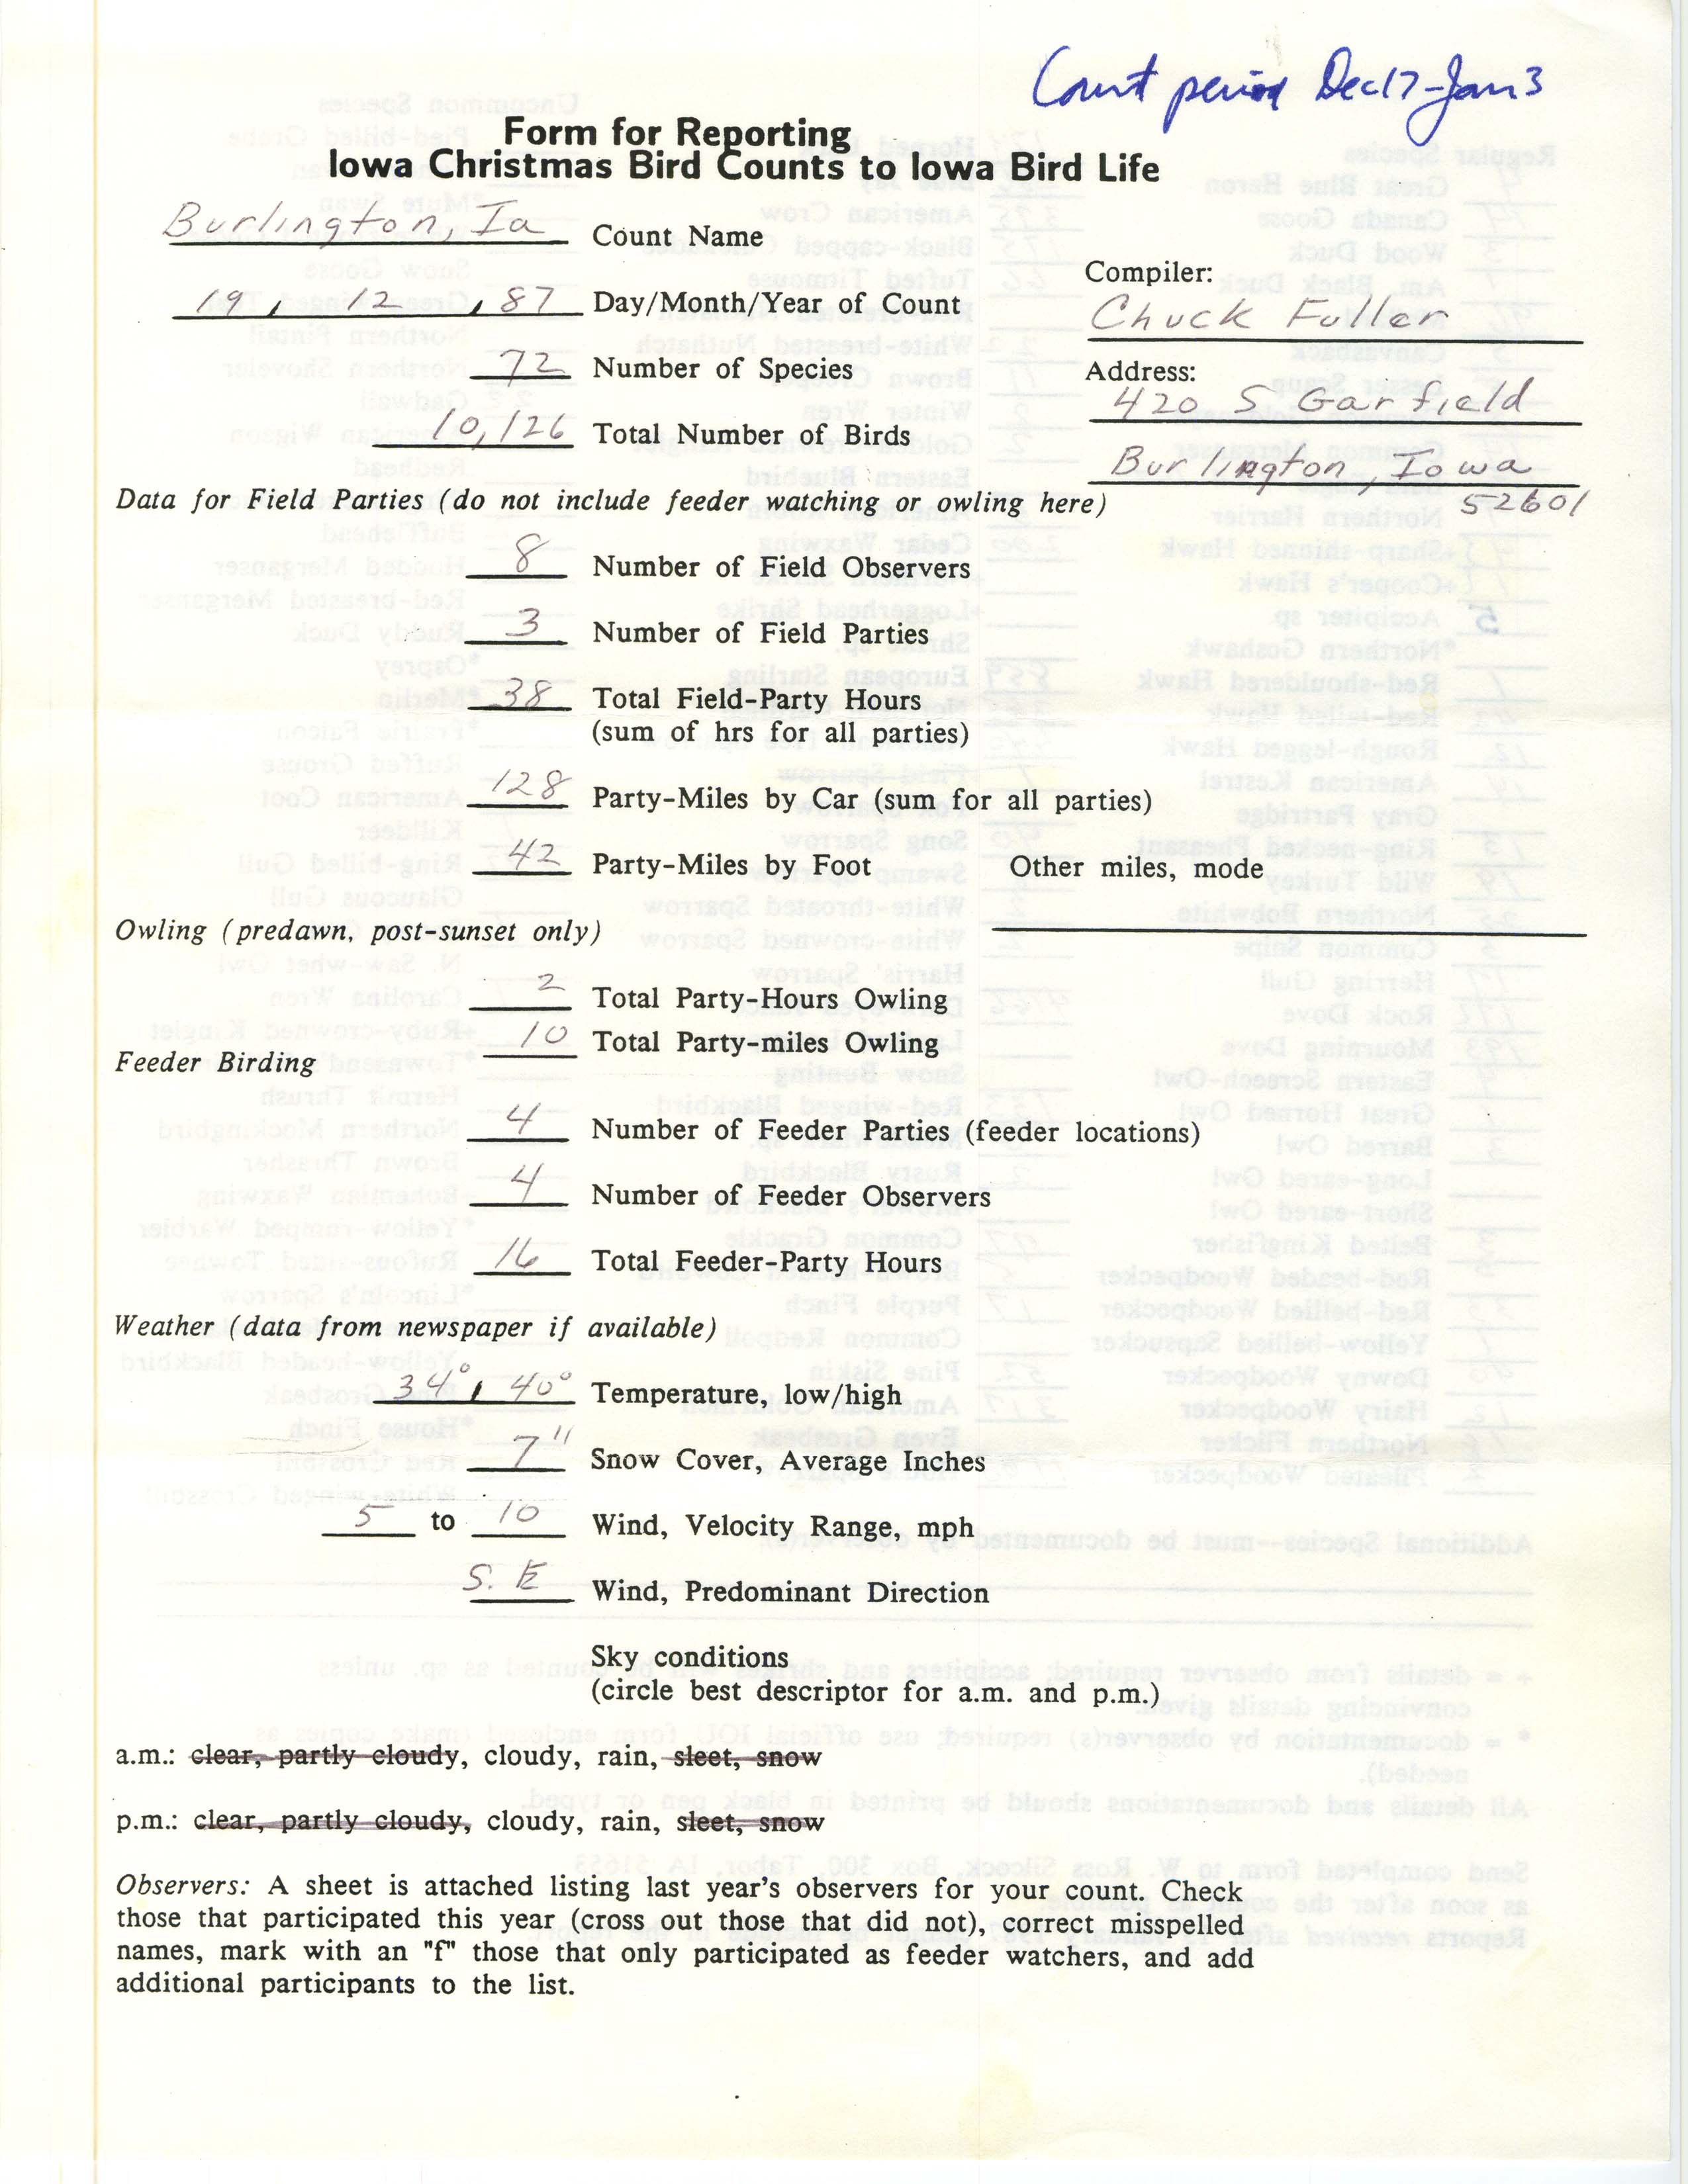 Form for reporting Iowa Christmas bird counts to Iowa Bird Life, Charles Fuller, December 19, 1987